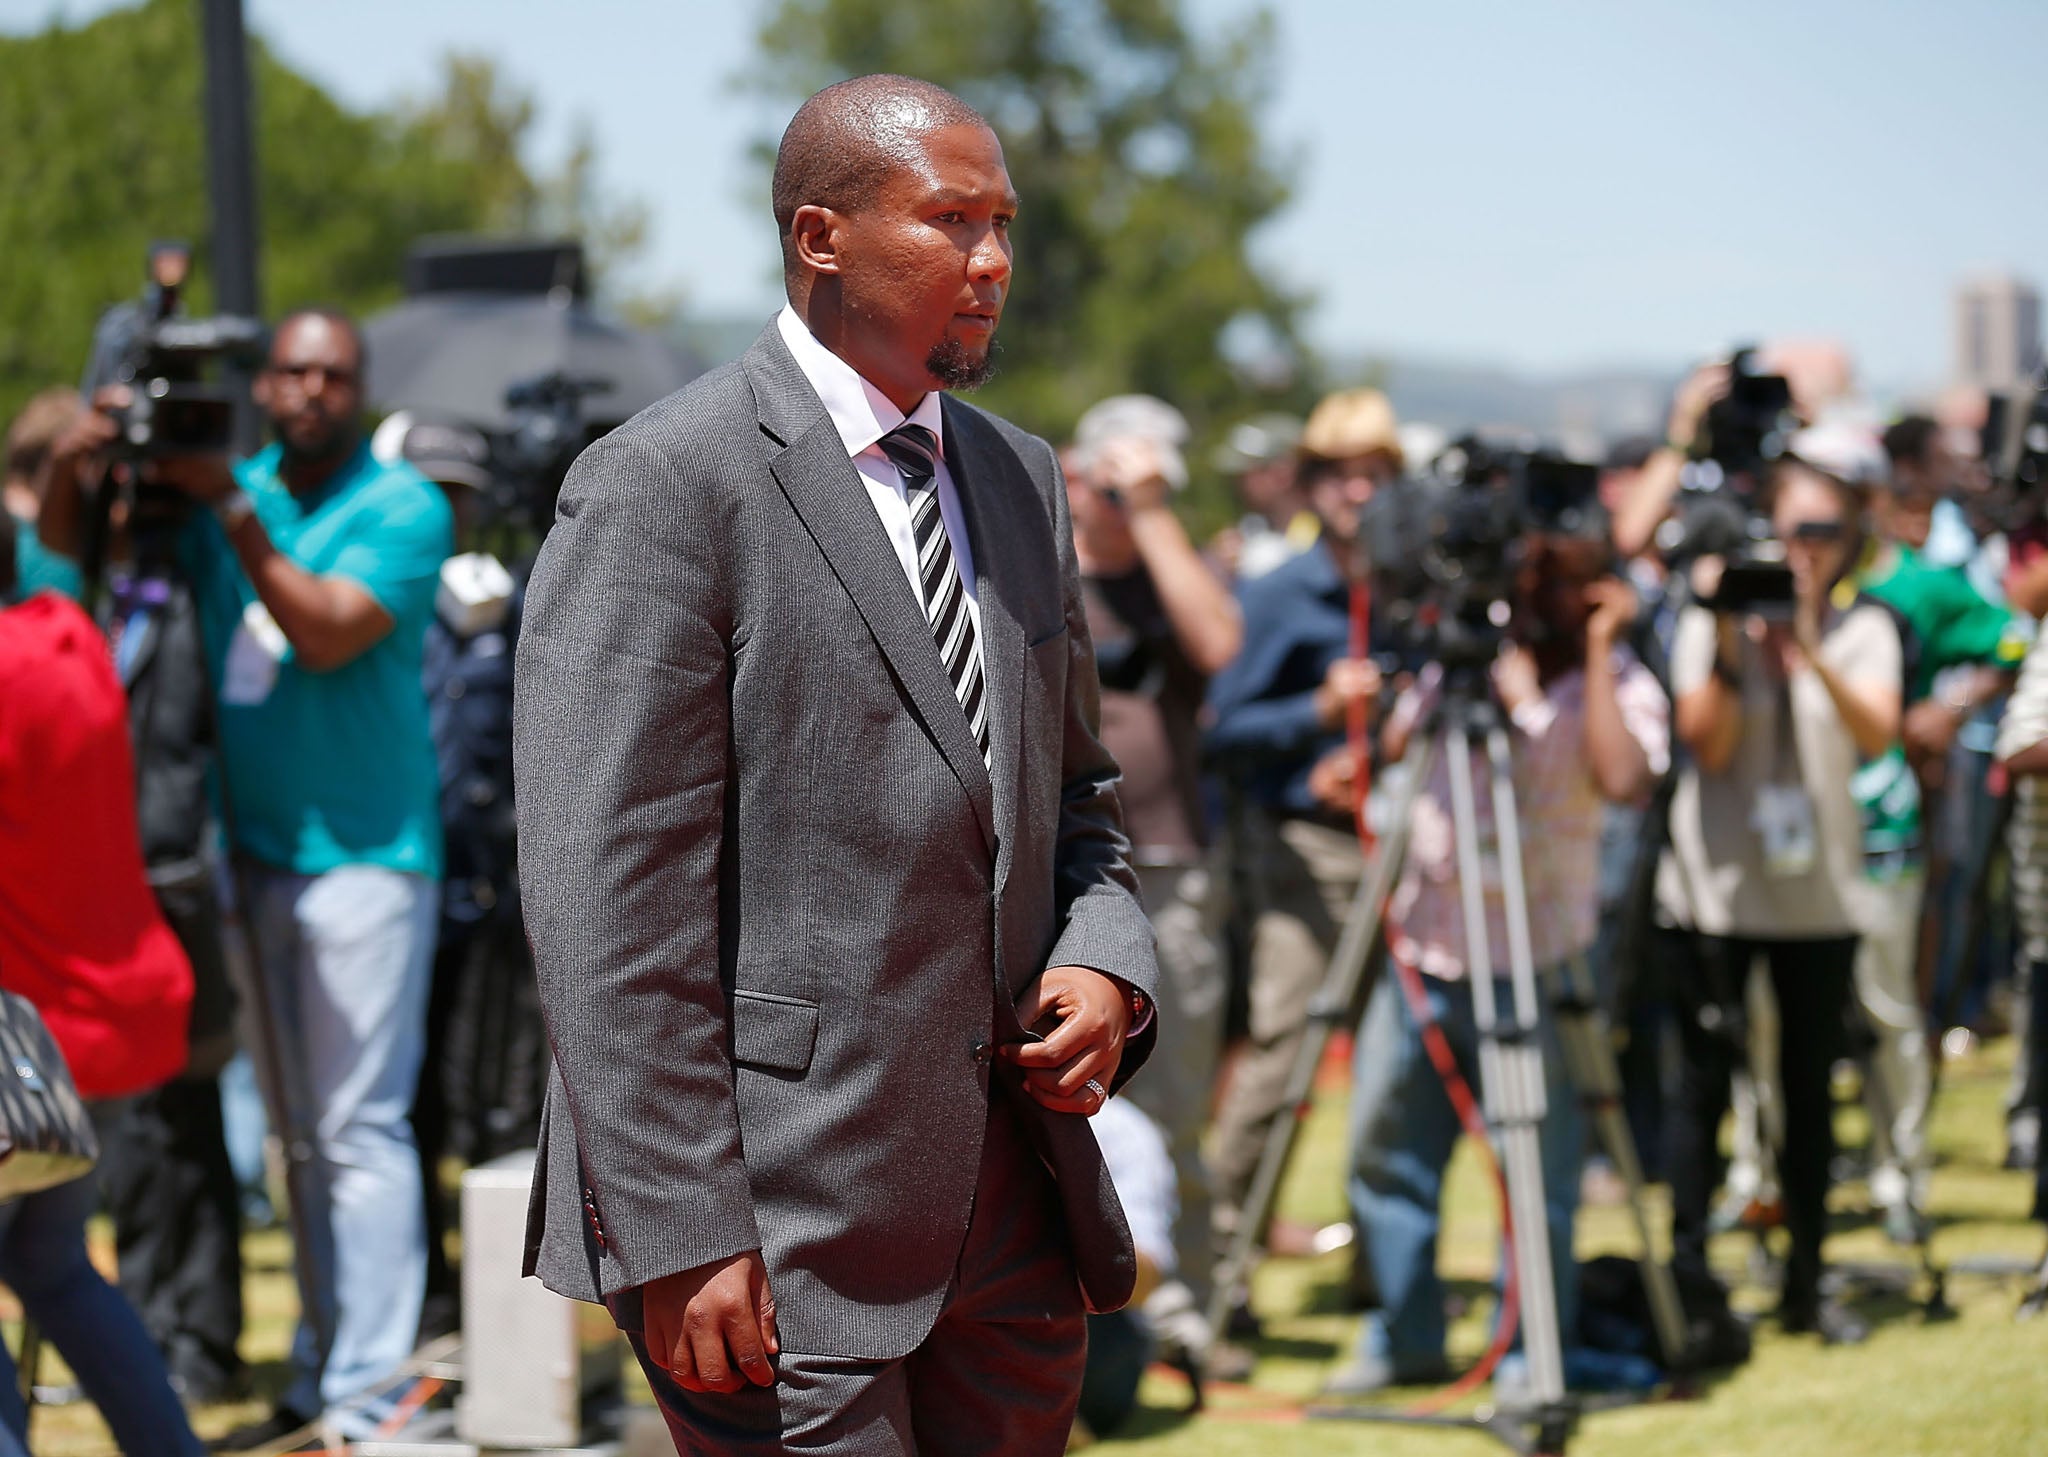 The locks at the home of Nelson Mandela’s eldest grandson Mandla Mandela in Qunu have been changed amid reports that a long-standing family feud is set to worsen in the wake of his death.